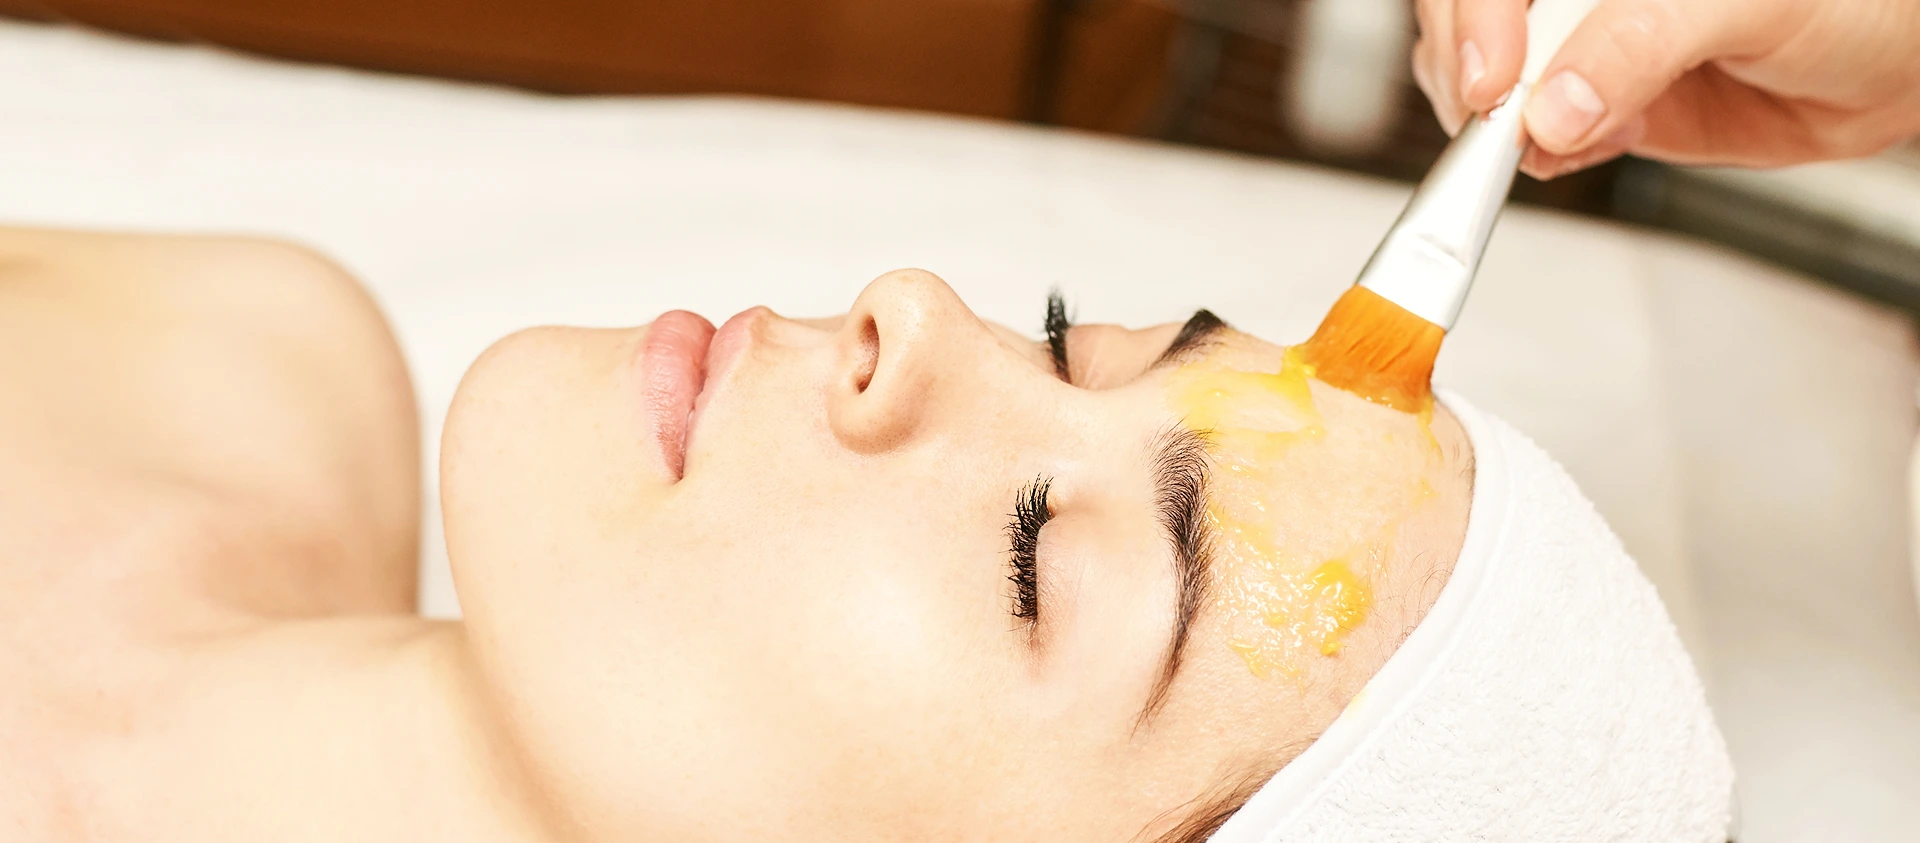 when can i dermaplane after chemical peel